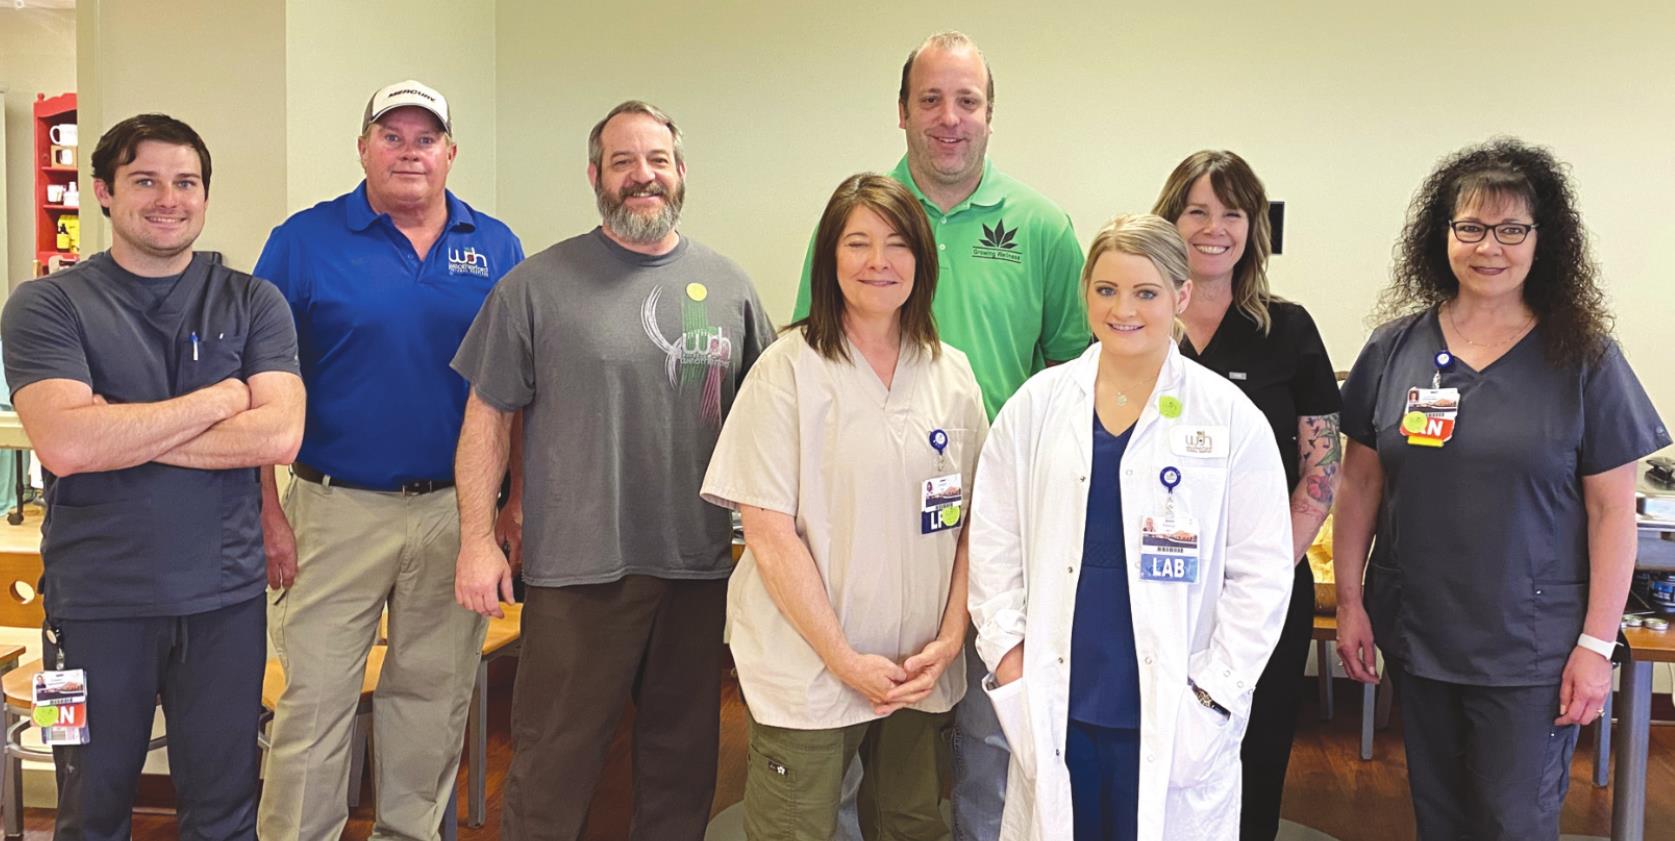 Jason Johnson, with The Wellness Joint and Growing Wellness, back row, third from right, donated meals to Weatherford Regional Hospital employees earlier this week to thank them for their service during COVID-19.